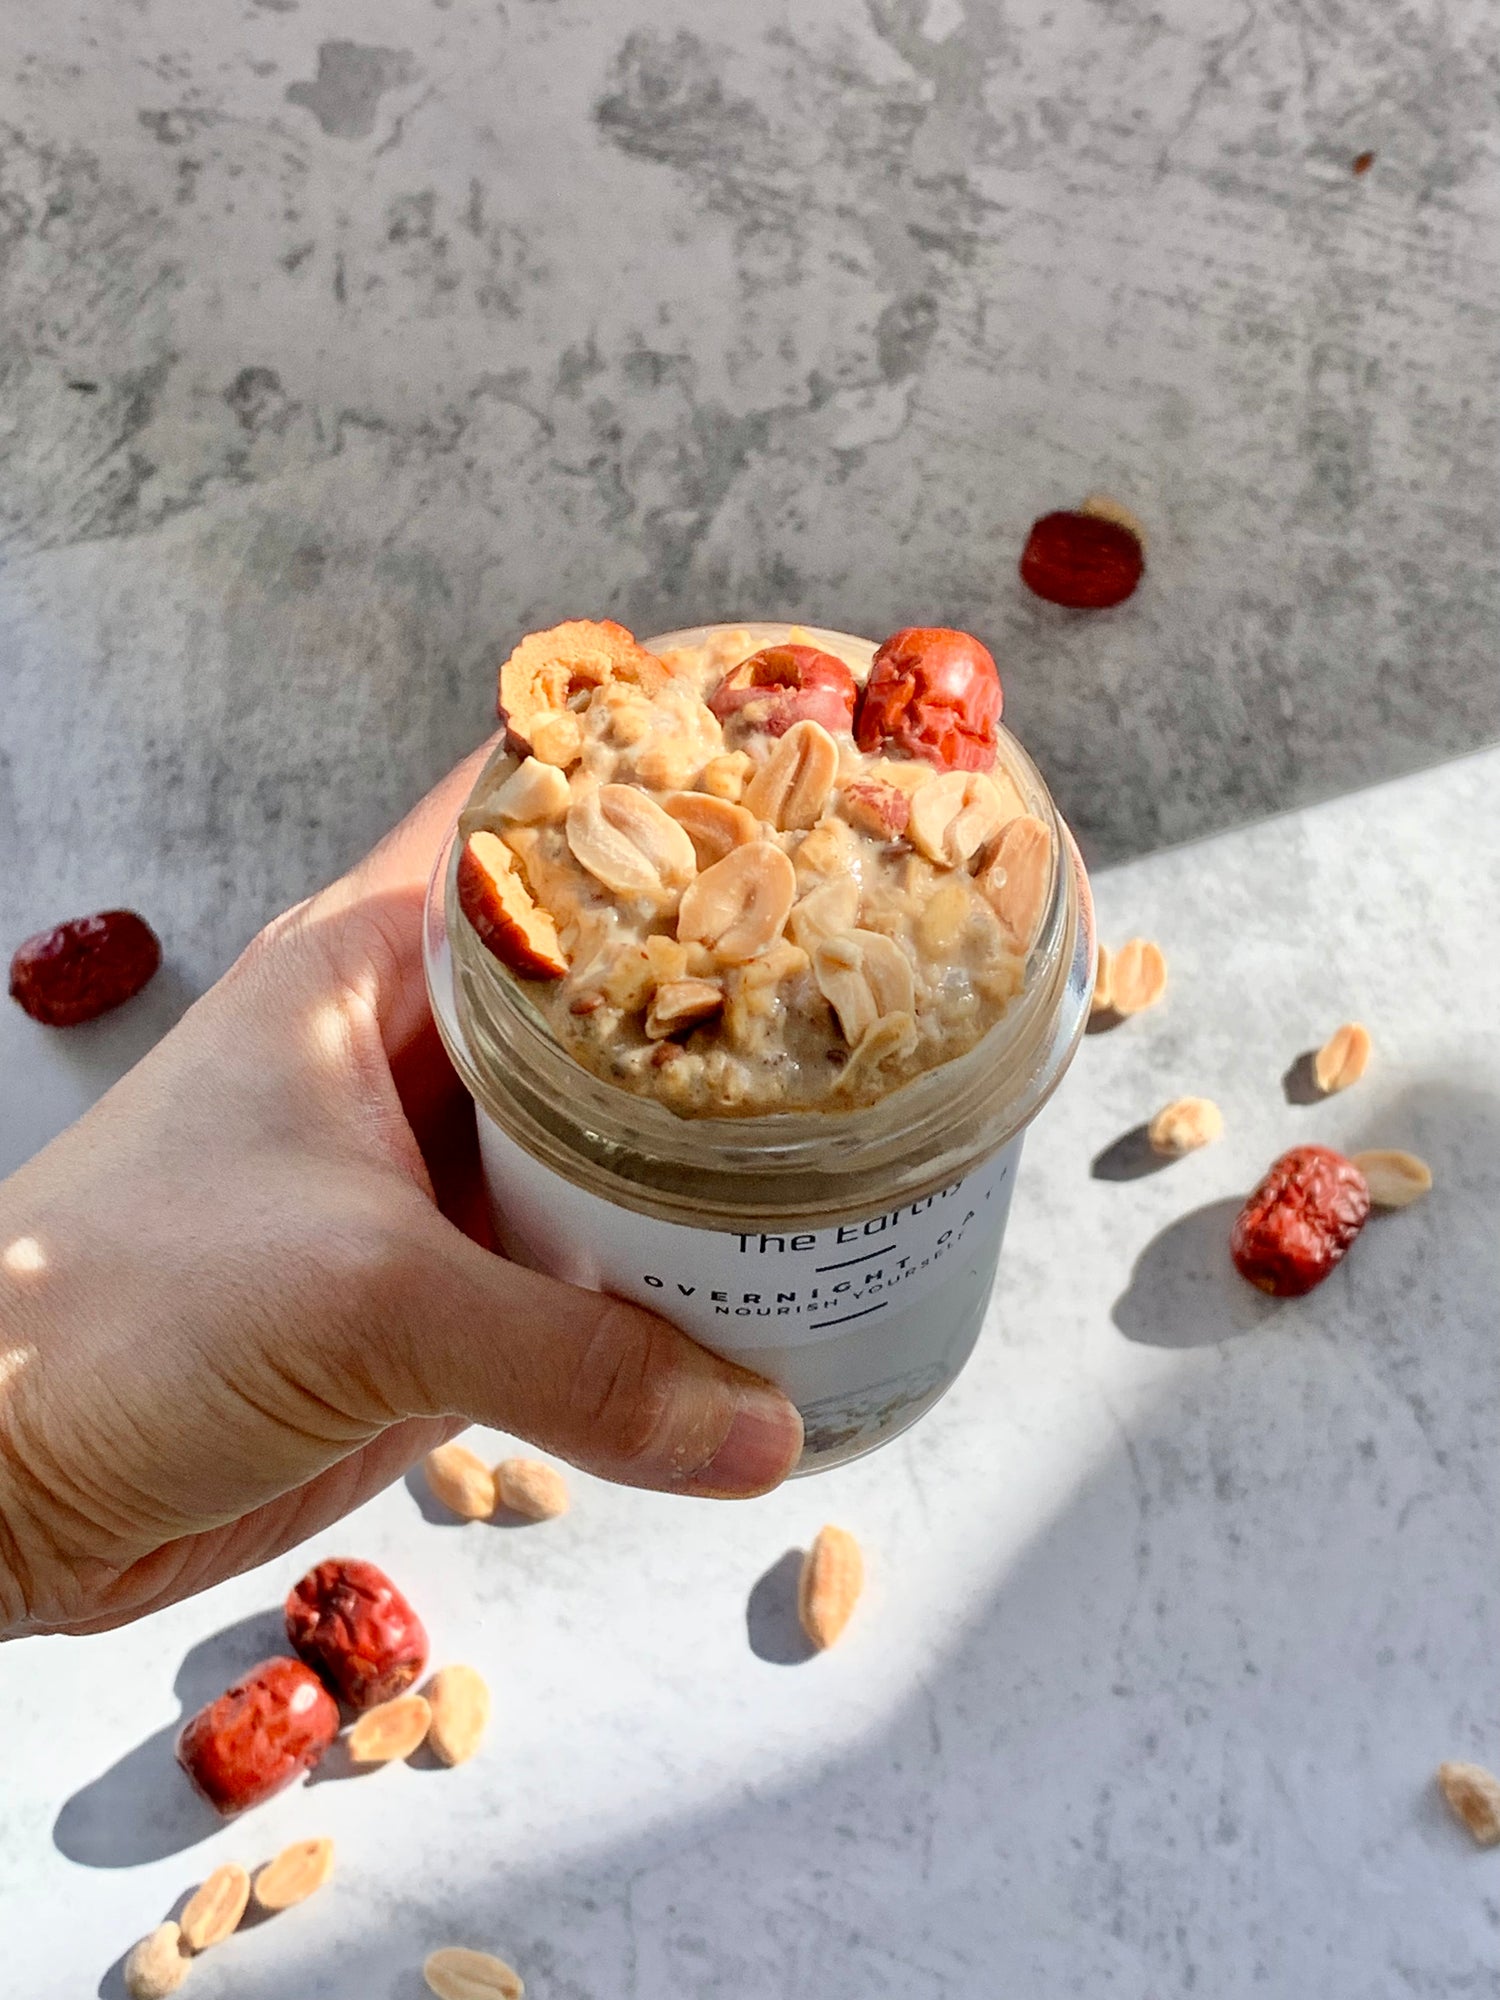 Peanut & Jujube Superfood Overnight Oats - crunchy peanuts with sweet, red jujube pieces, ready to eat in glass jar